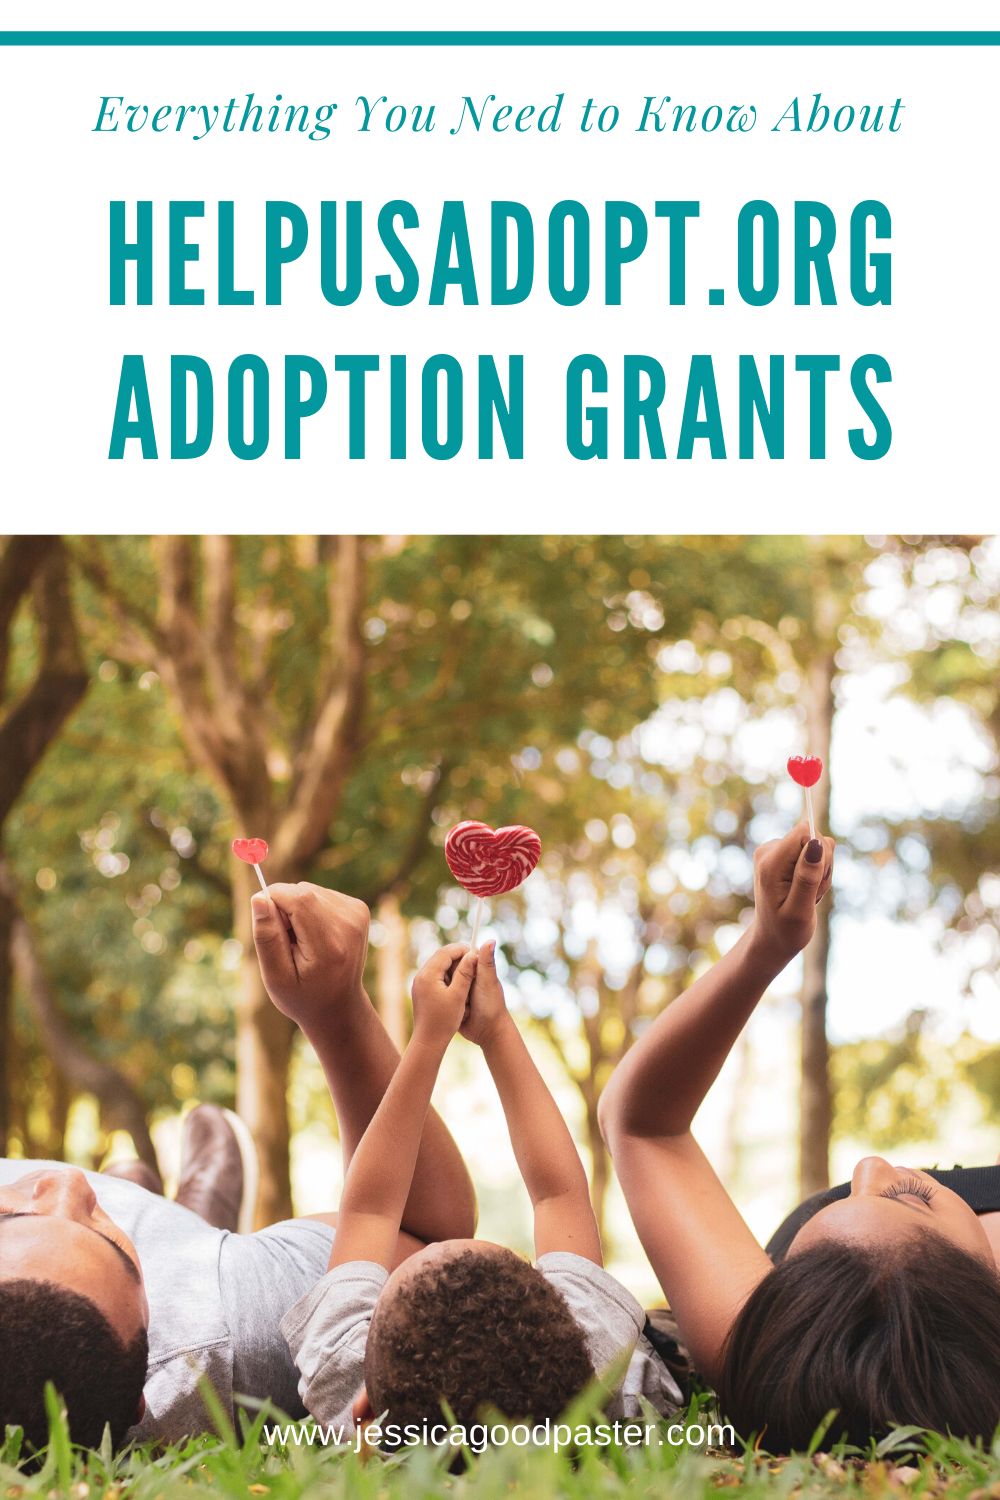 Everything You Need to Know About Adoption Grants